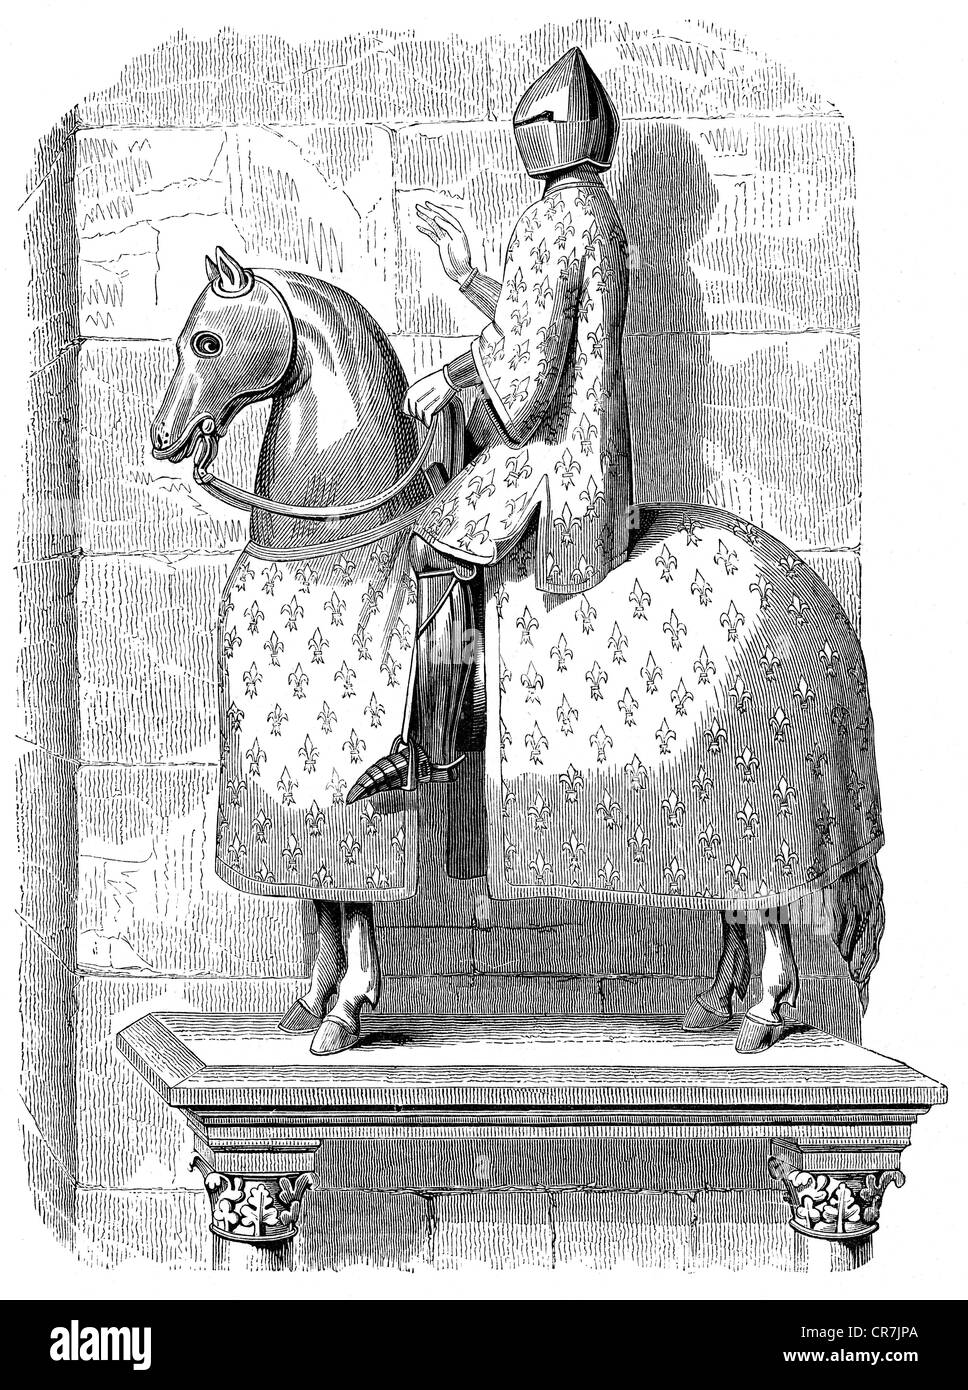 Philip IV 'the Fair', 1268 - 29.11.1314, King of France 1285 - 1314, full length, on horseback in armour, entering Paris after his victory in Flandres, wood engraving, 19th century, after a equestrian statue (destroyed in 1772), Stock Photo